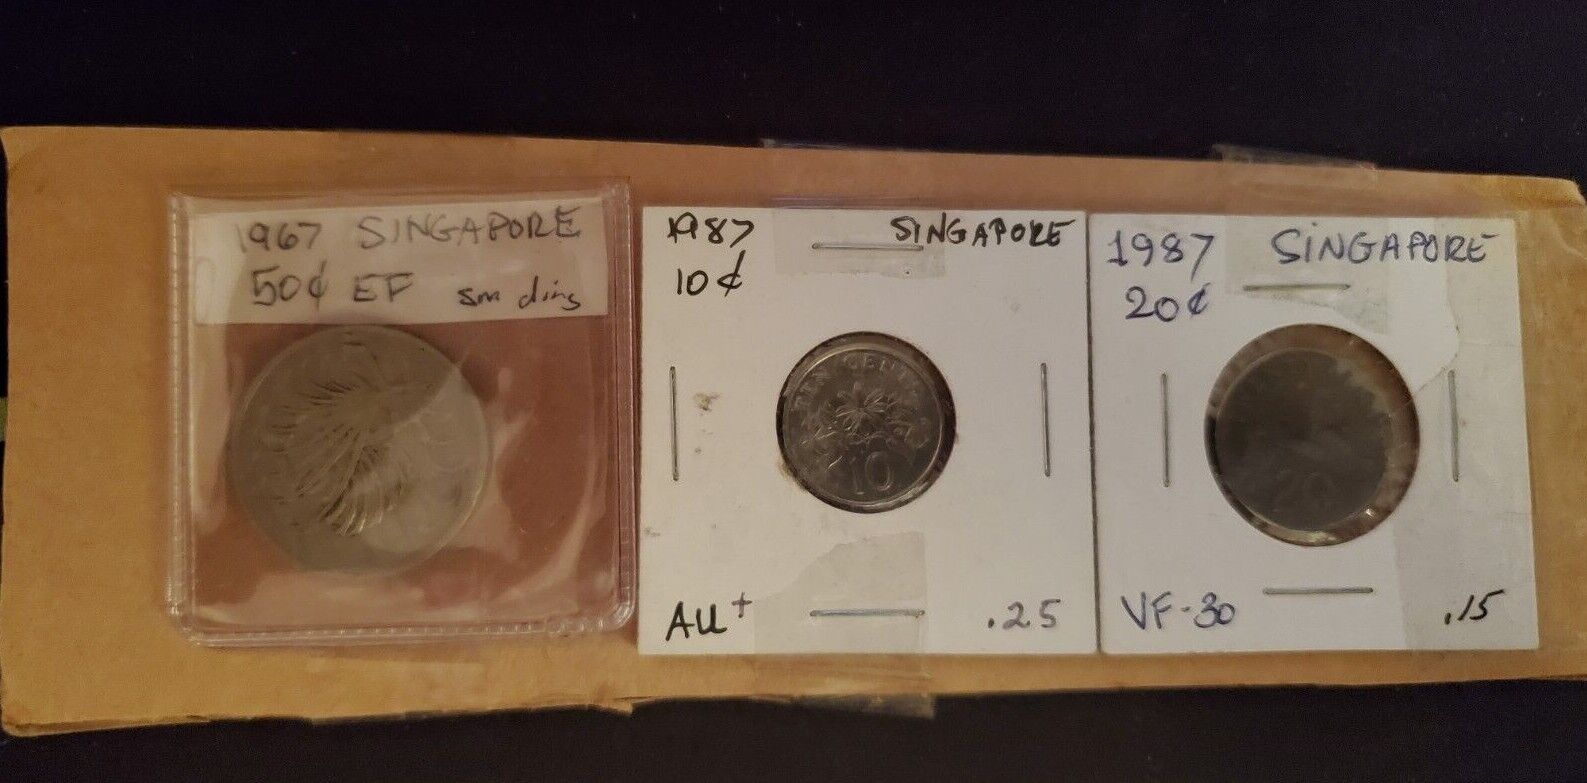 Singapore 60s 80s Coins 90 Cents Total